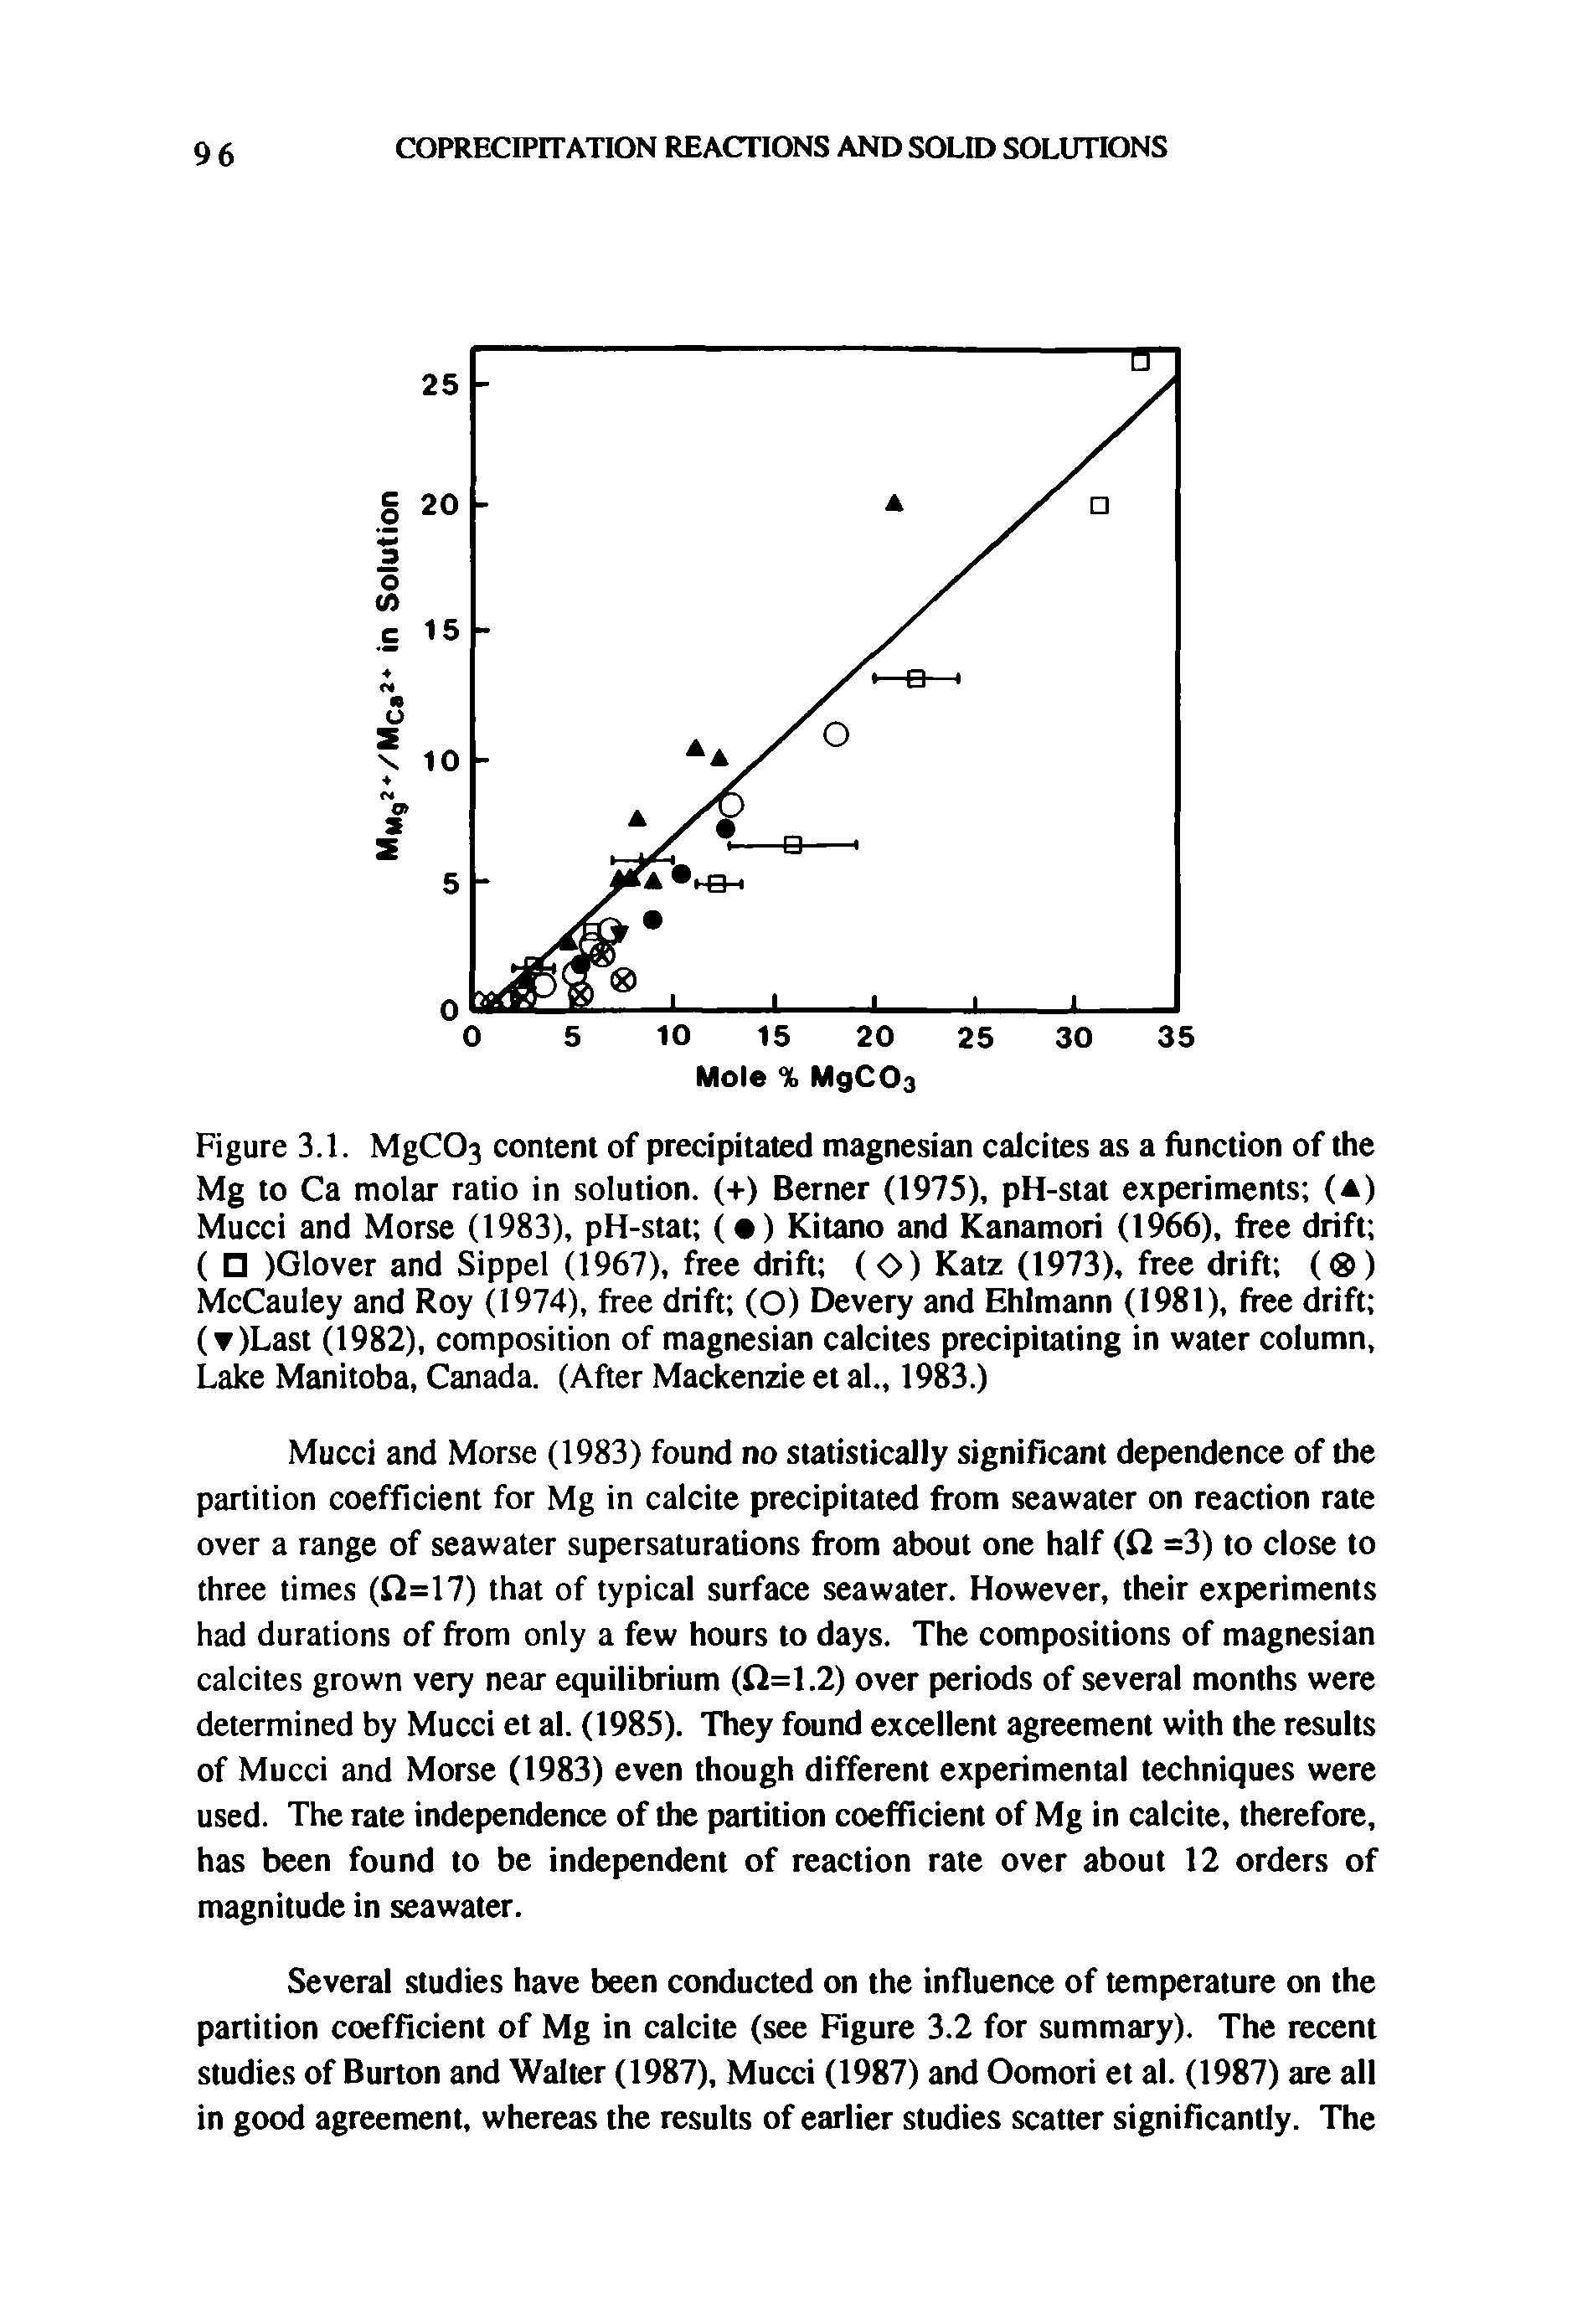 Figure 3.1. MgC03 content of precipitated magnesian calcites as a function of the Mg to Ca molar ratio in solution. (+) Berner (1975), pH-stat experiments (a) Mucci and Morse (1983), pH-stat ( ) Kitano and Kanamori (1966), free drift ( )Glover and Sippel (1967), free drift (O) Katz (1973), free drift ( ) McCauley and Roy (1974), free drift (O) Devery and Ehlmann (1981), free drift ( )Last (1982), composition of magnesian calcites precipitating in water column, Lake Manitoba, Canada. (After Mackenzie et al., 1983.)...